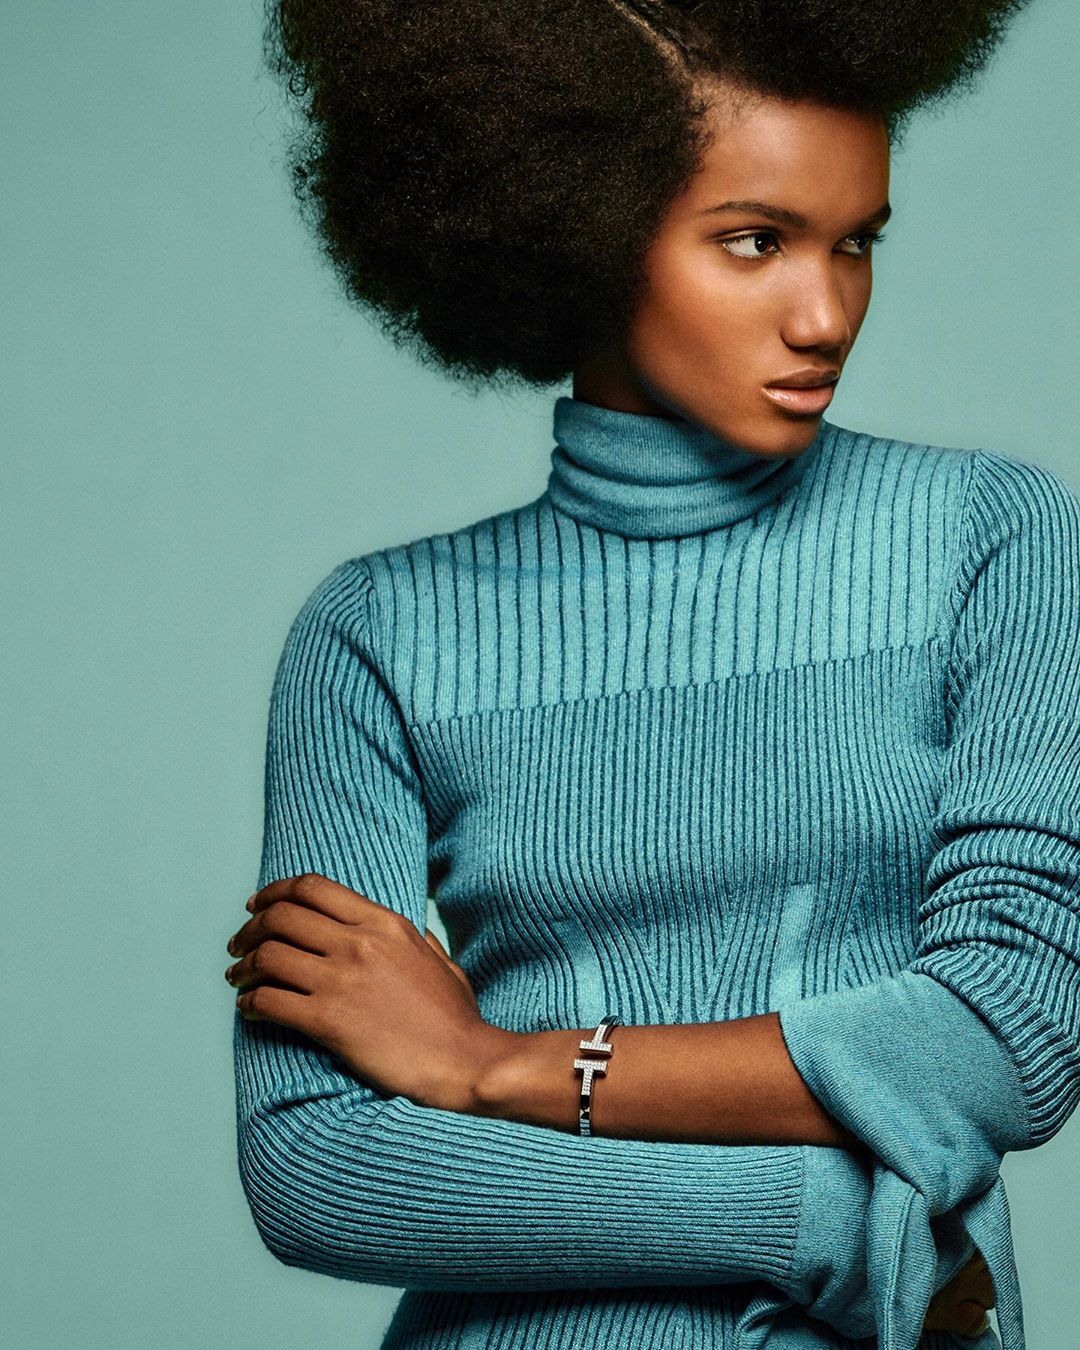 Tiffany & Co. - The Tiffany Style Sessions 
𝘛𝘪𝘧𝘧𝘢𝘯𝘺 𝘛 𝘚𝘵𝘺𝘭𝘦𝘥 𝘣𝘺 𝘈𝘭𝘦𝘹 𝘞𝘩𝘪𝘵𝘦
•
This fall, we asked masters of style to interpret Tiffany collections through their unique points of view.
•
First up: accl...